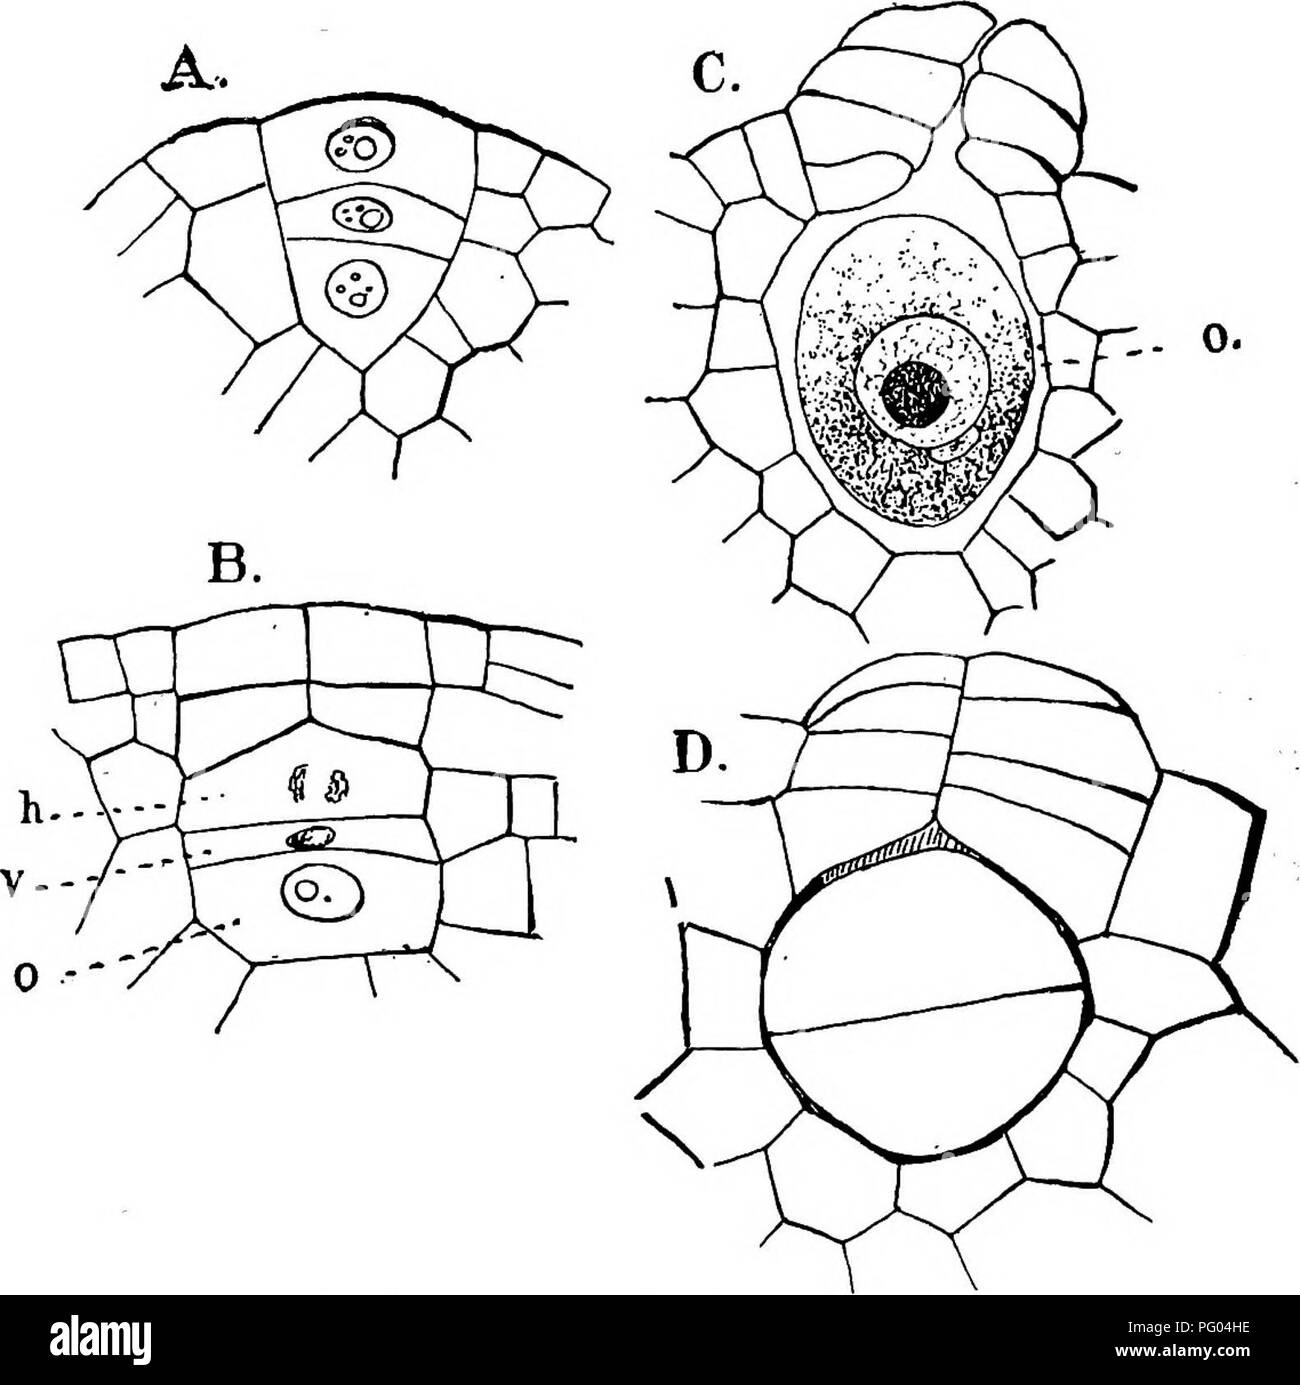 . The structure and development of mosses and ferns (Archegoniatae). Plant morphology; Mosses; Ferns. S44 MOSSES AND FERNS CHAP. than in Marattia, the neck canal cell is shorter and extends but little between the neck cells (Fig. 313, B). The e.gg is very large, round or oval in form, and the nucleus contains a large nucleolus that stains very intensely, but otherwise shows little chromatin. The receptive spot is of unusual size, and occupies about one-third of the &amp;gg. It is. Fig. 3ii.—Isoeies eehinospora var. Braunii. Development of the archegonium, X500; 0, the e^g', V, ventral canal ce Stock Photo